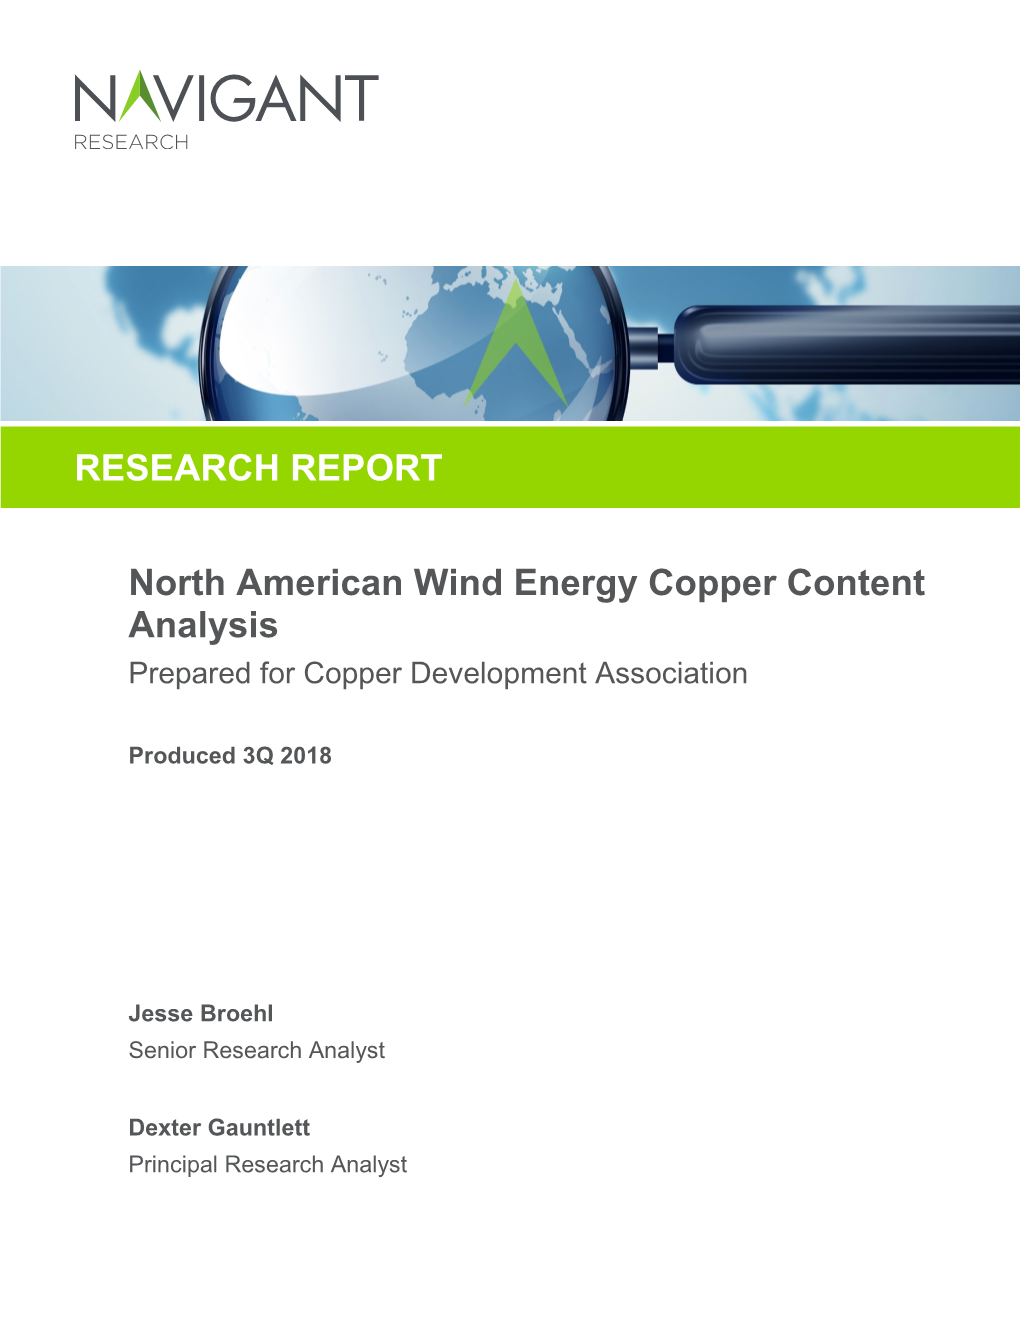 North American Wind Energy Copper Content Analysis RESEARCH REPORT